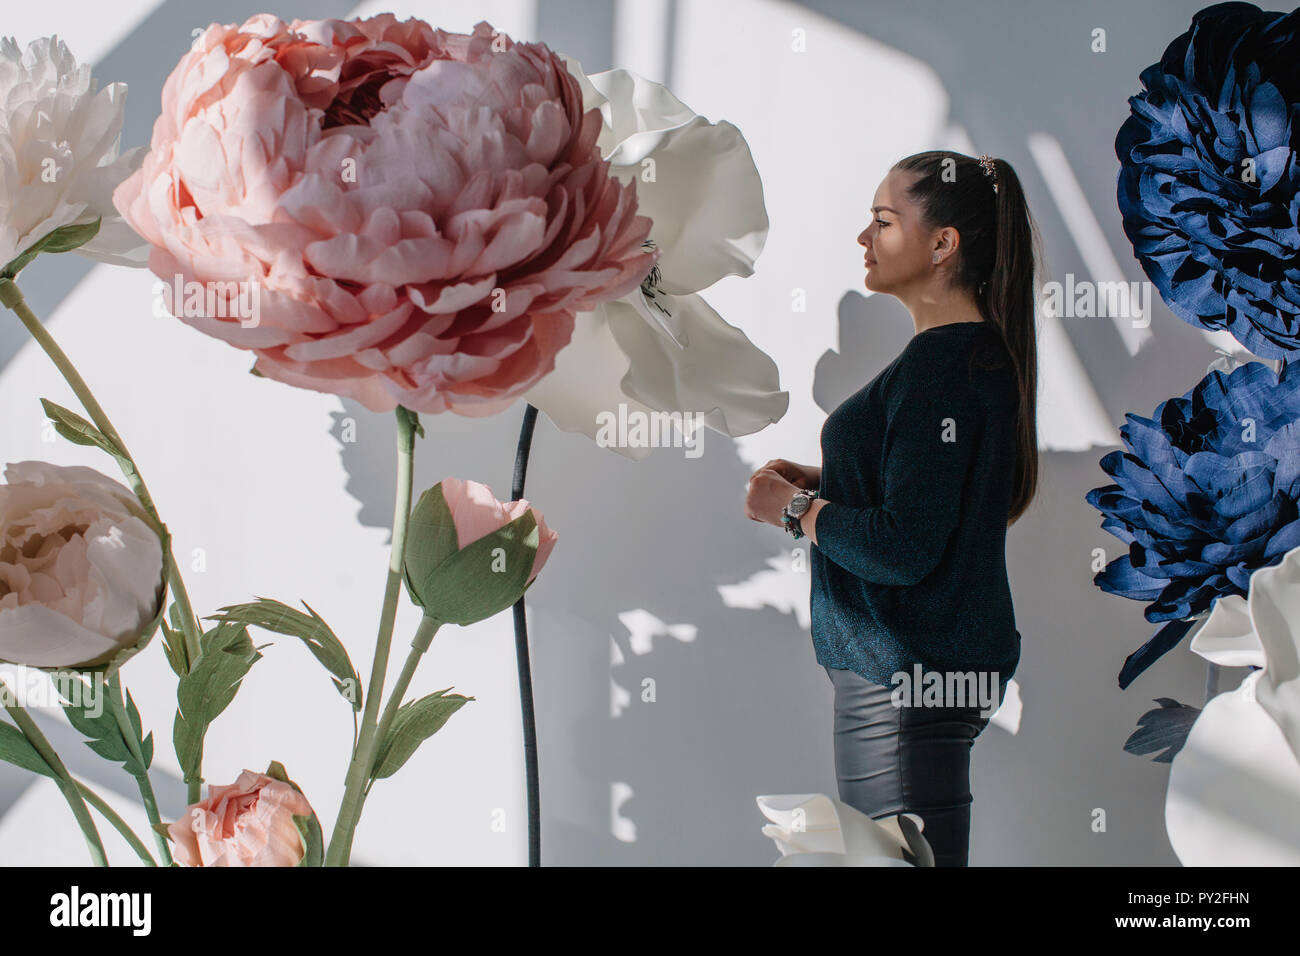 Portrait of a woman standing next to giant artificial flowers Stock Photo